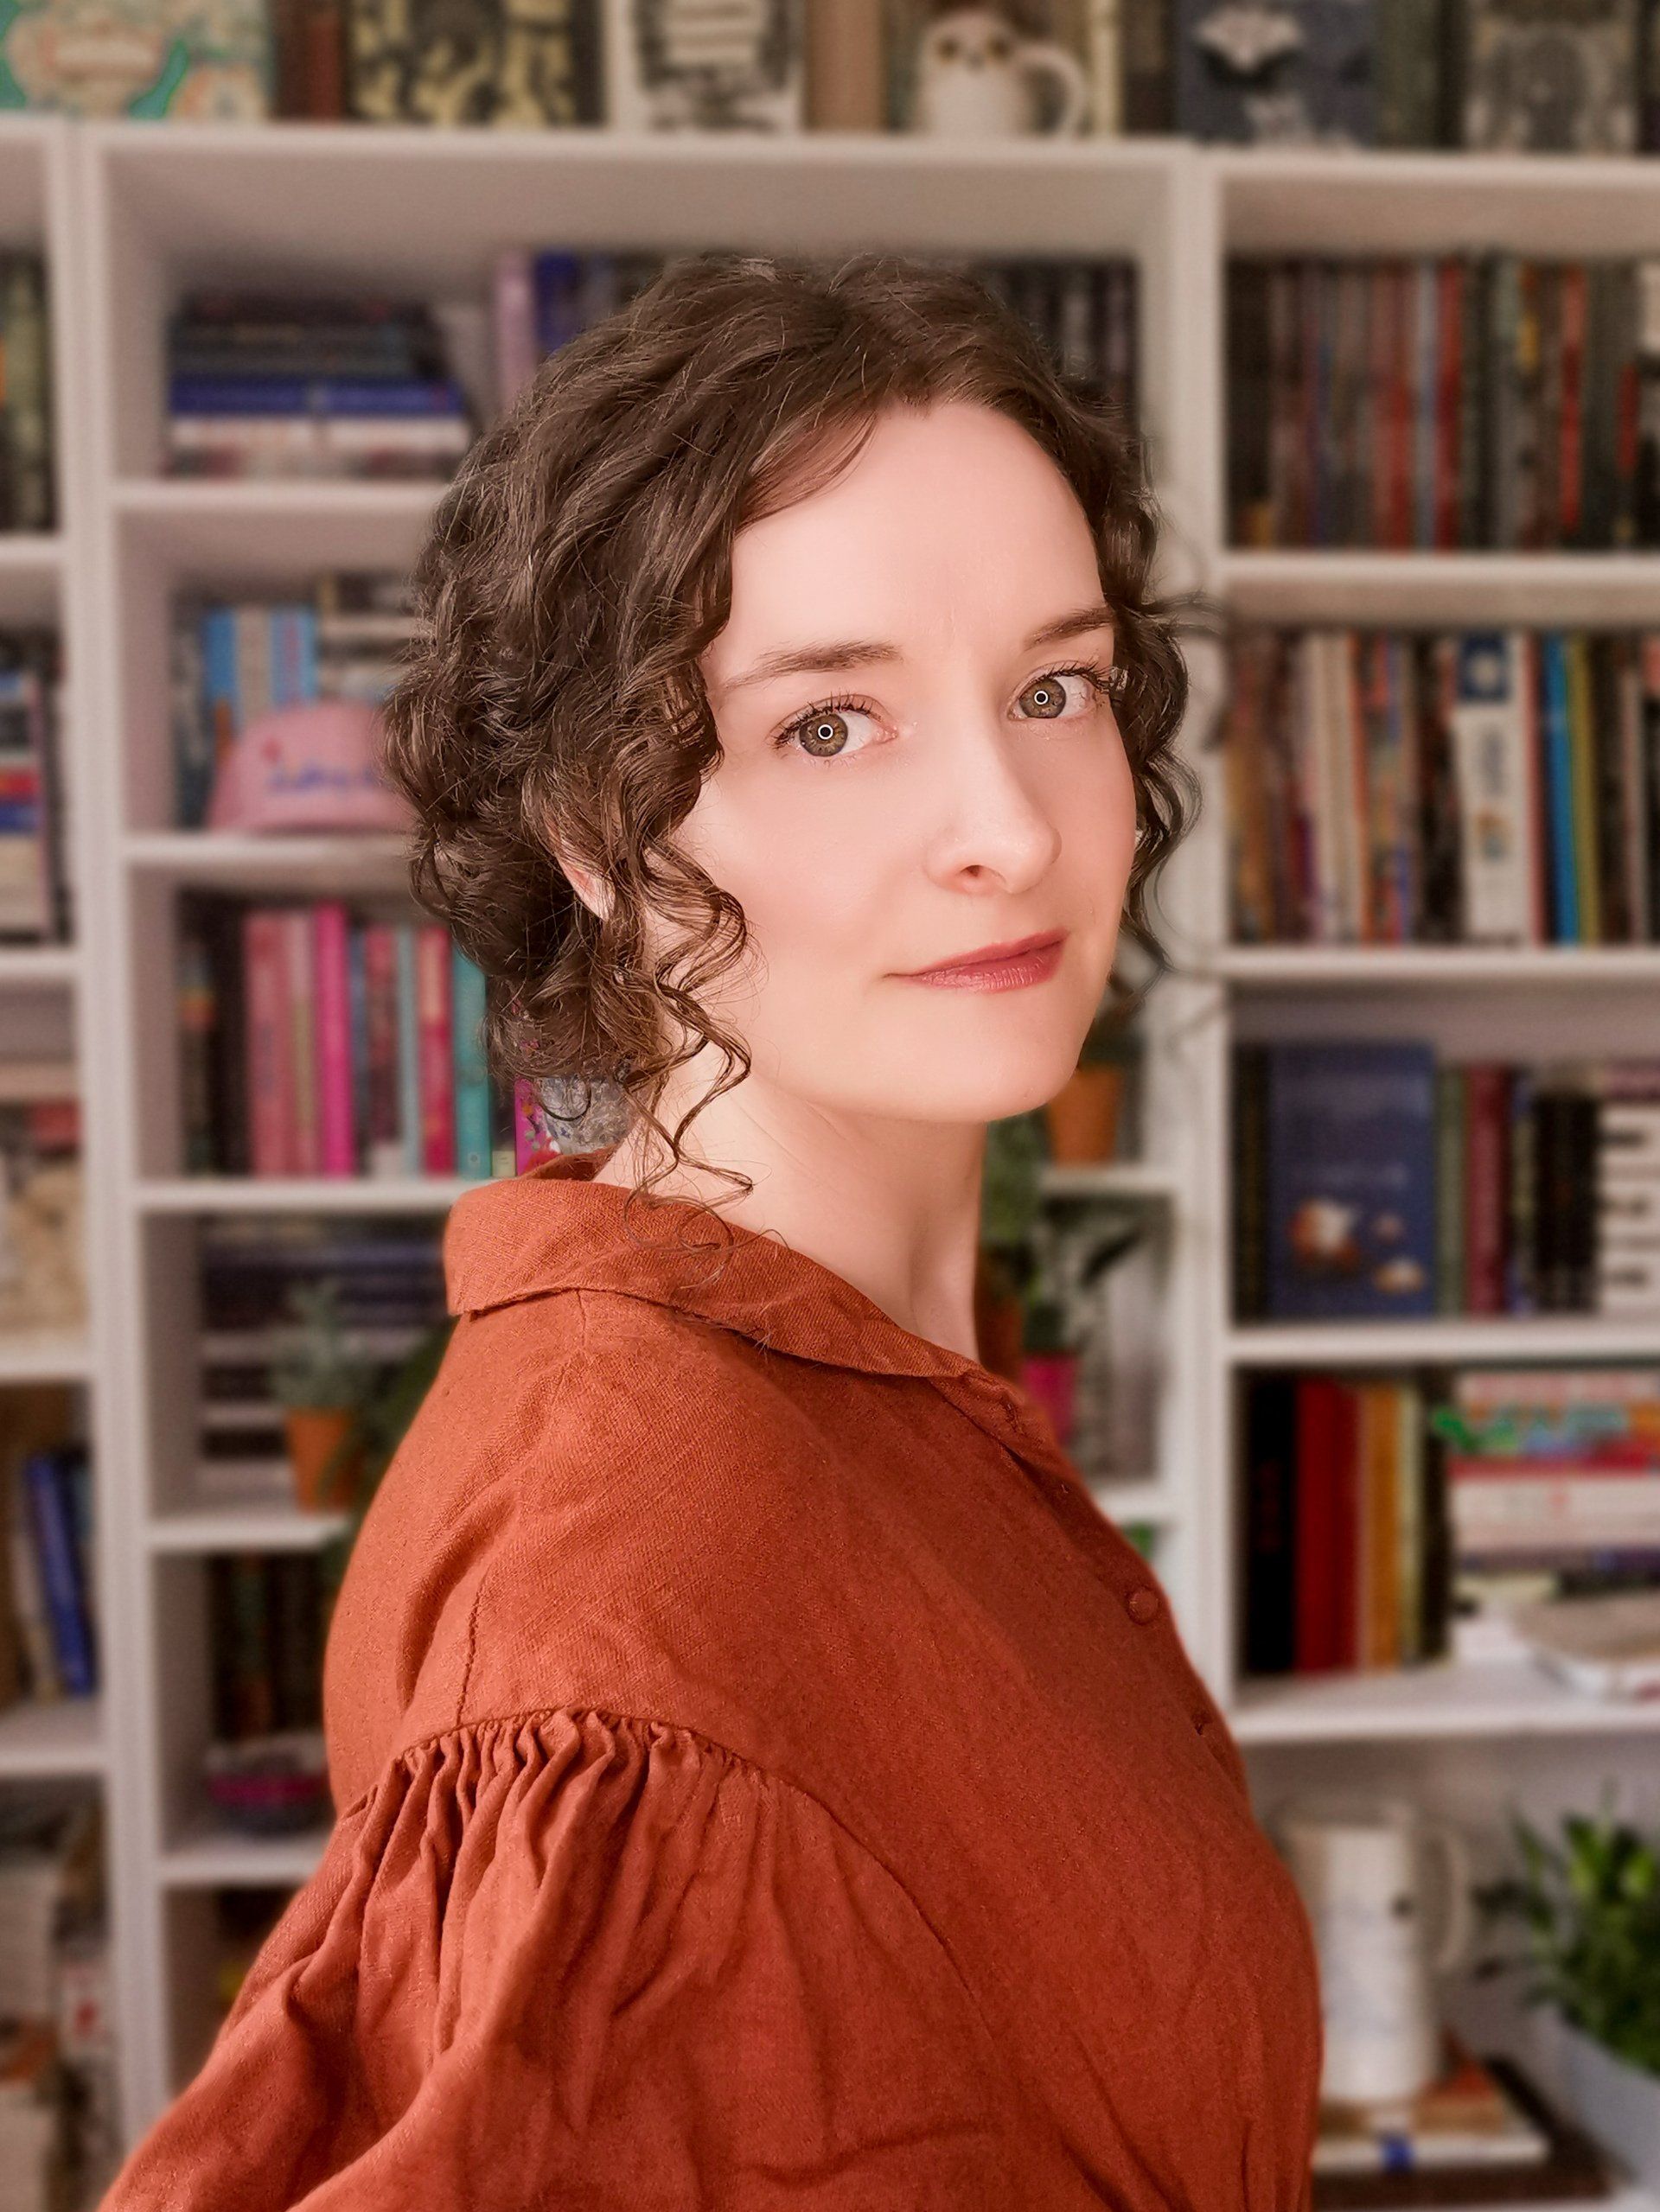 A woman with curly hair is standing in front of a bookshelf.